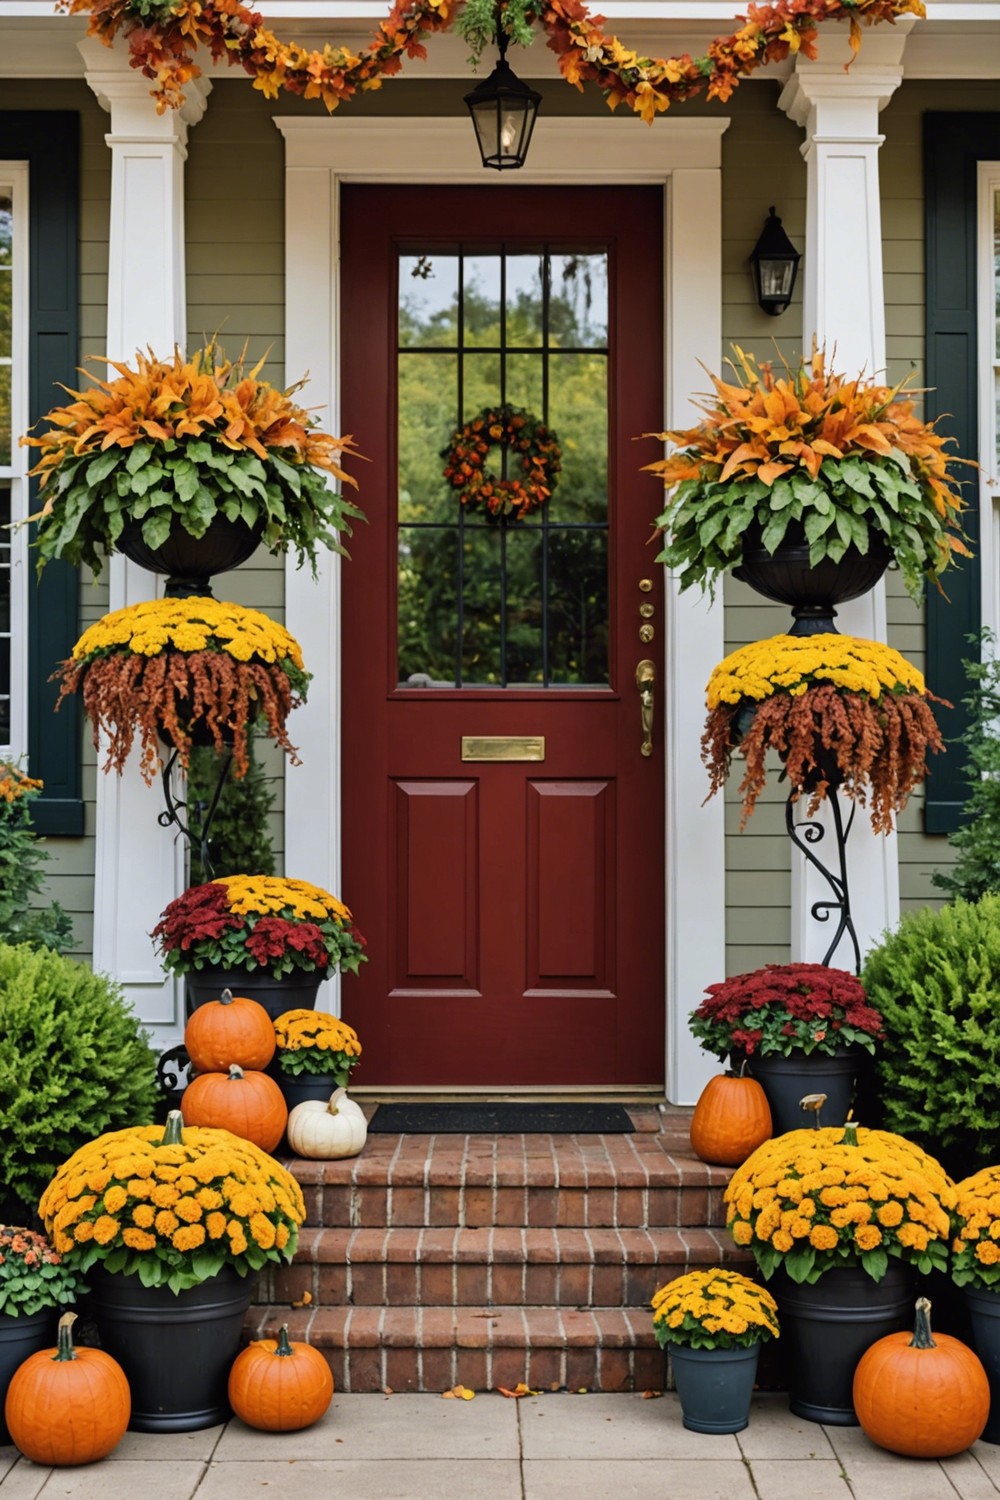 Fall-themed Planters and Pots